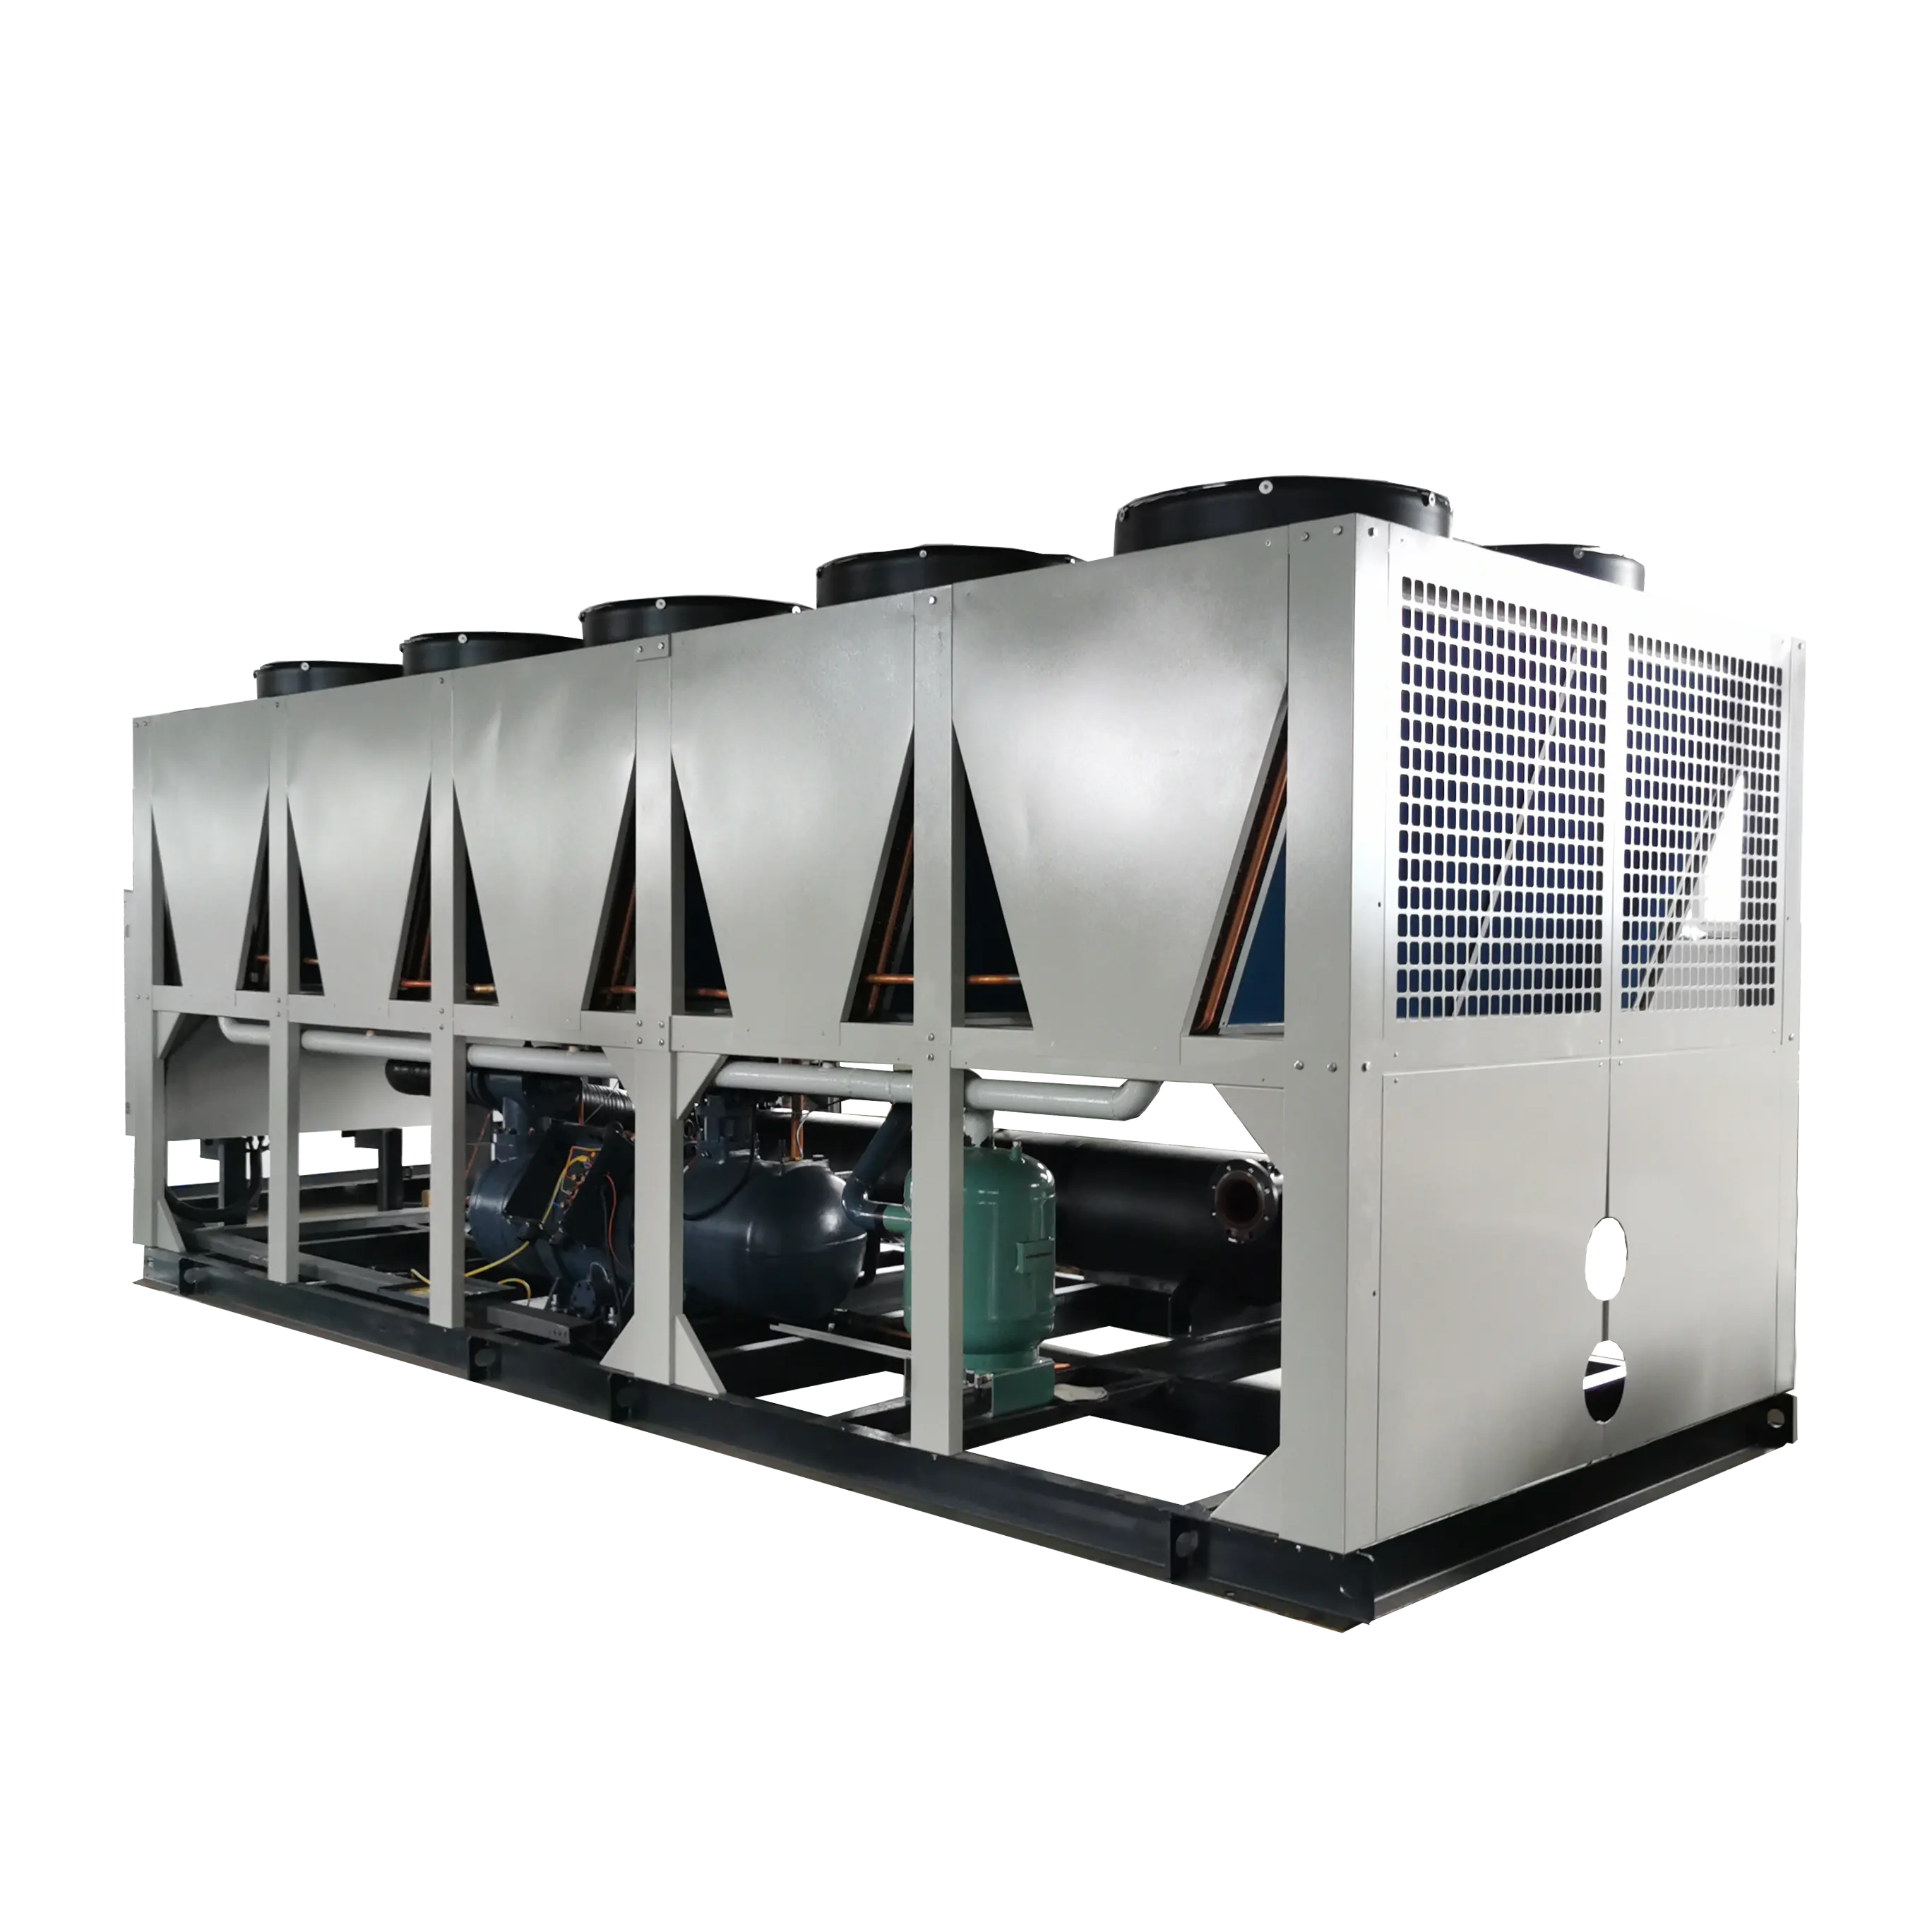 150KW 350KW 500KW water cooling system commercial air cooled chiller for mall platform resort